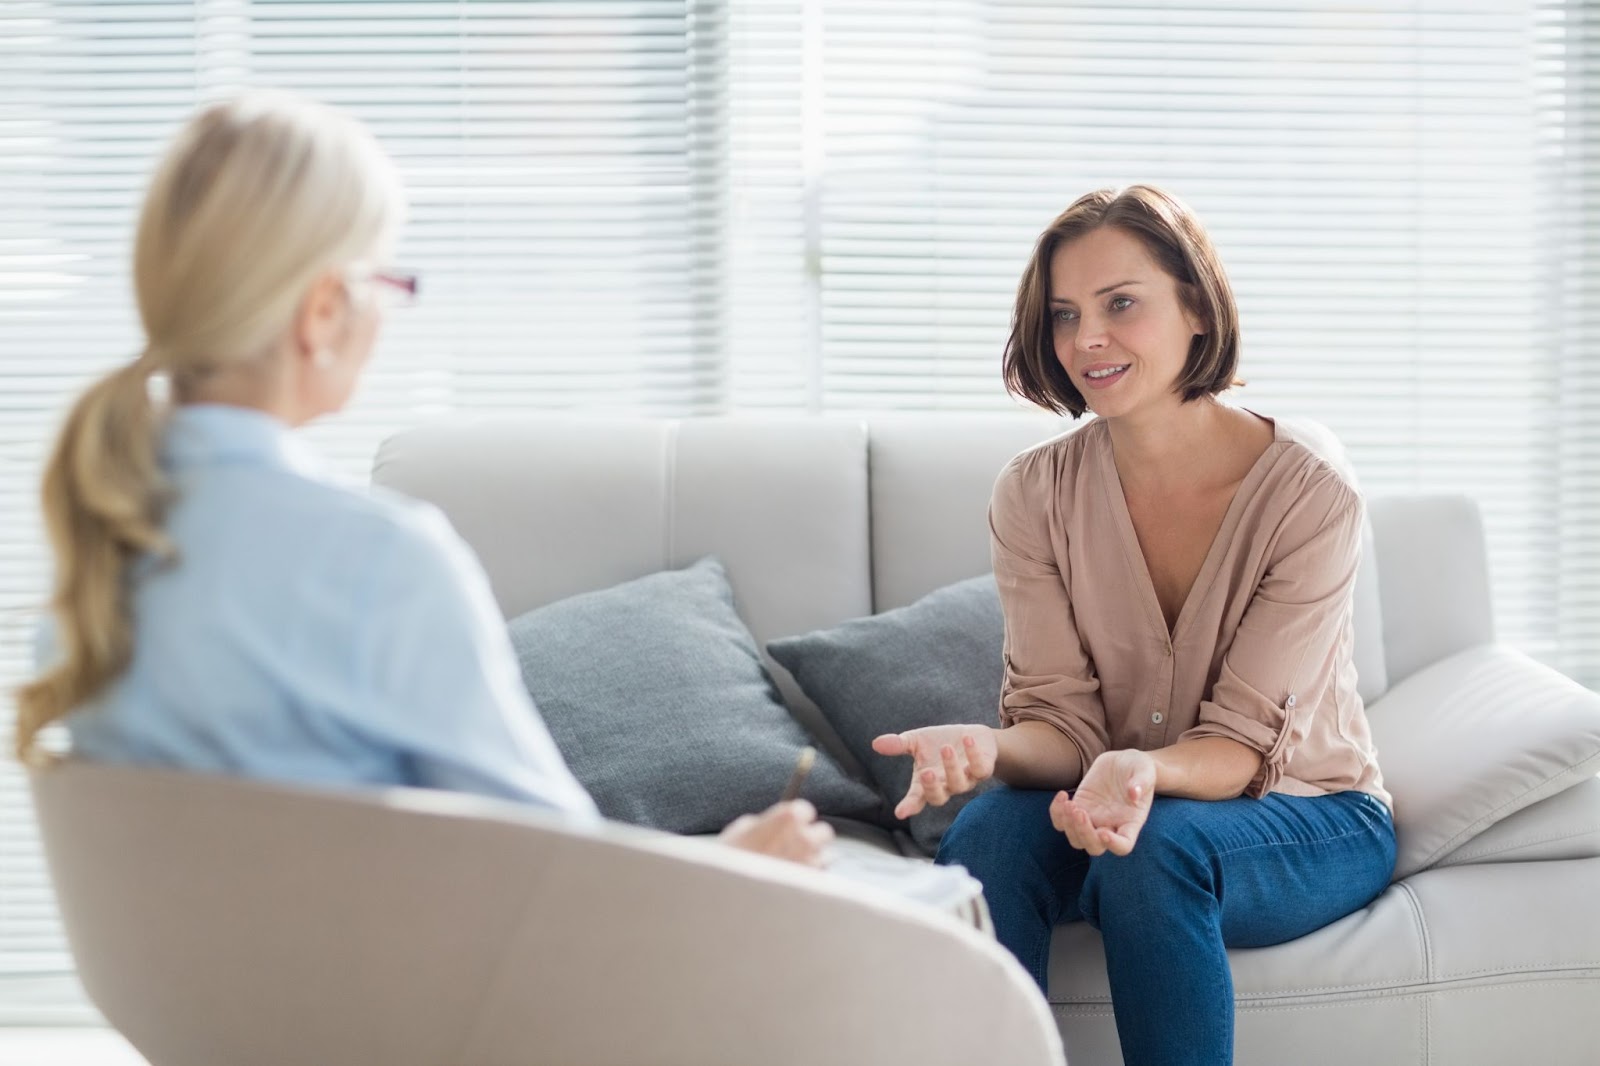 Two women engaged in a conversation about depression and suicidal ideation while sitting on a couch